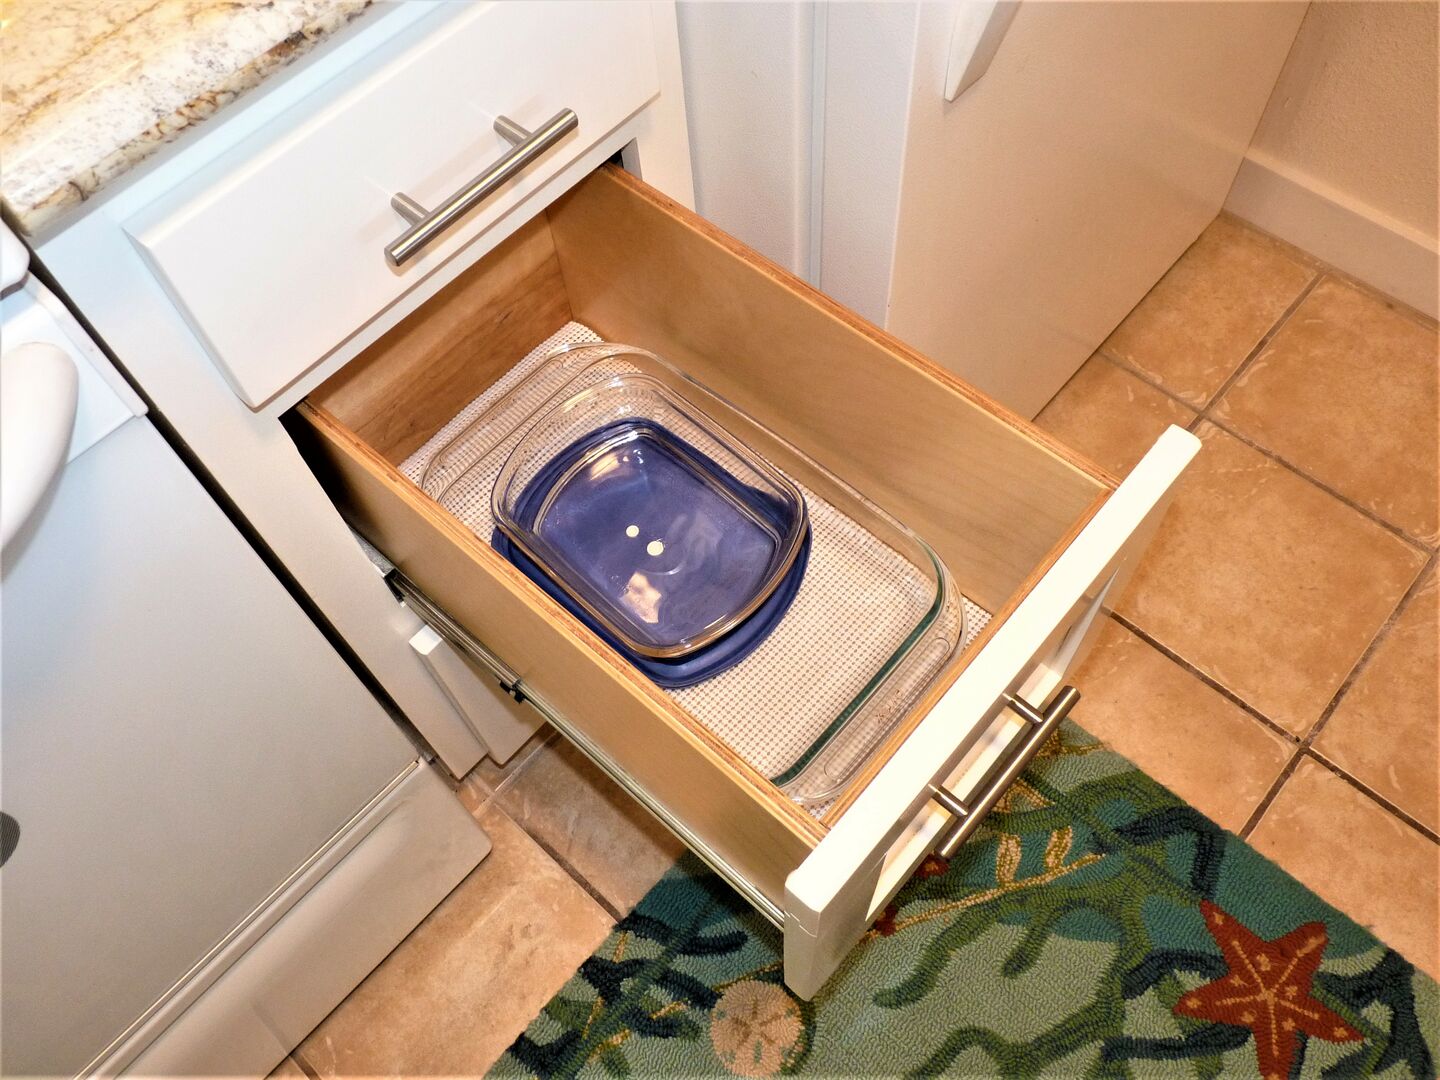 ...And, the drawers provide easy access to all the cookware.